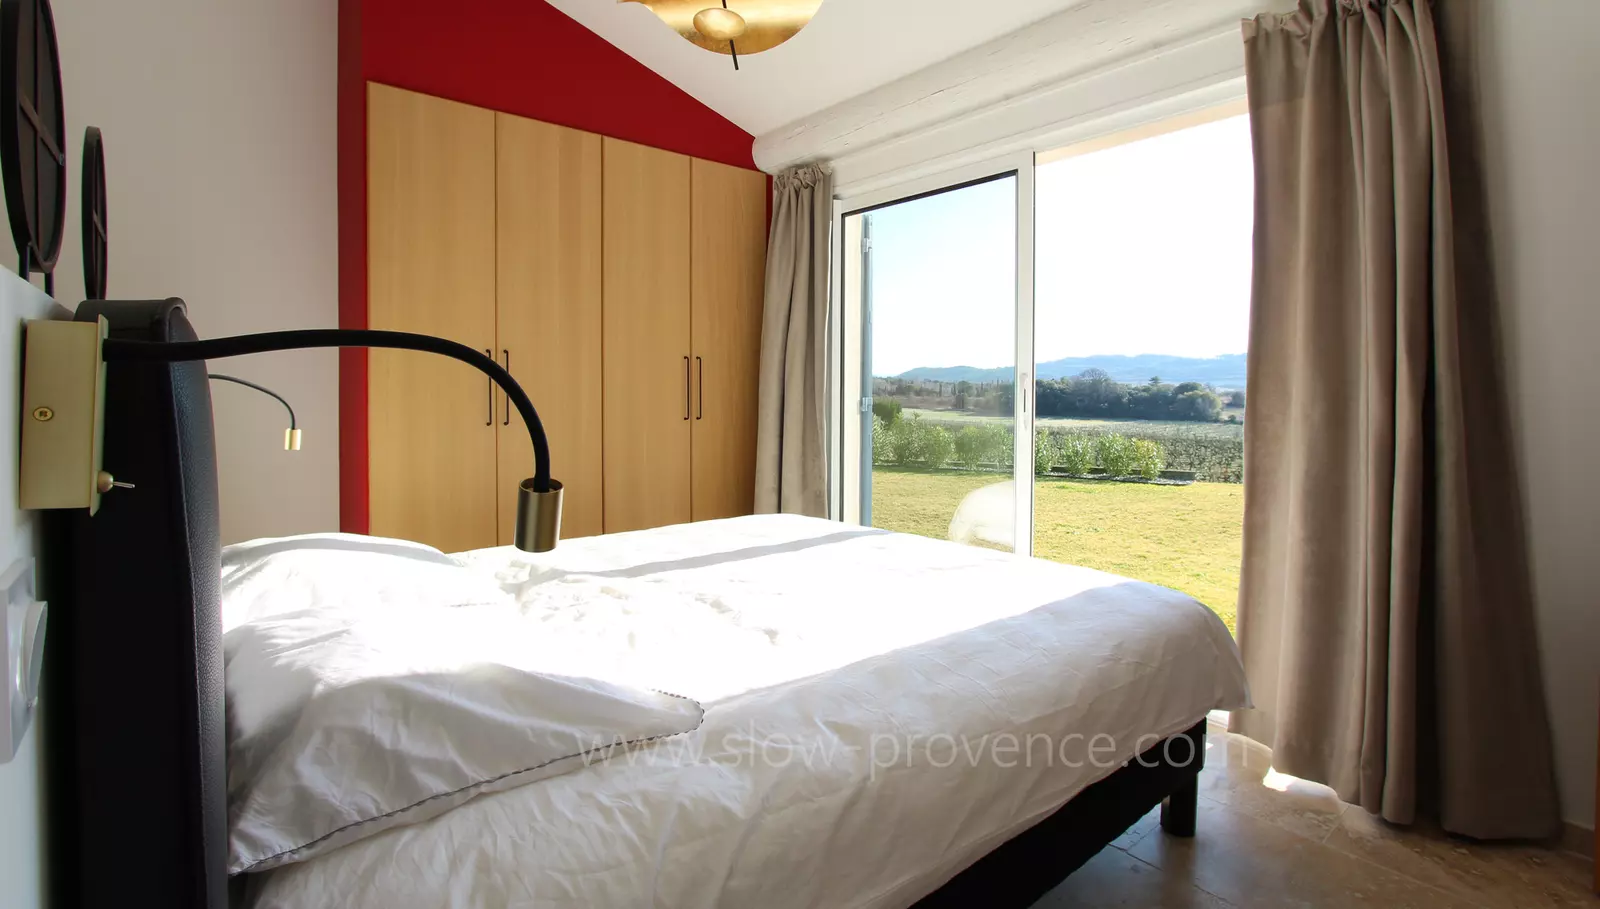 Bedroom 3 - View of the vineyards and access to the garden